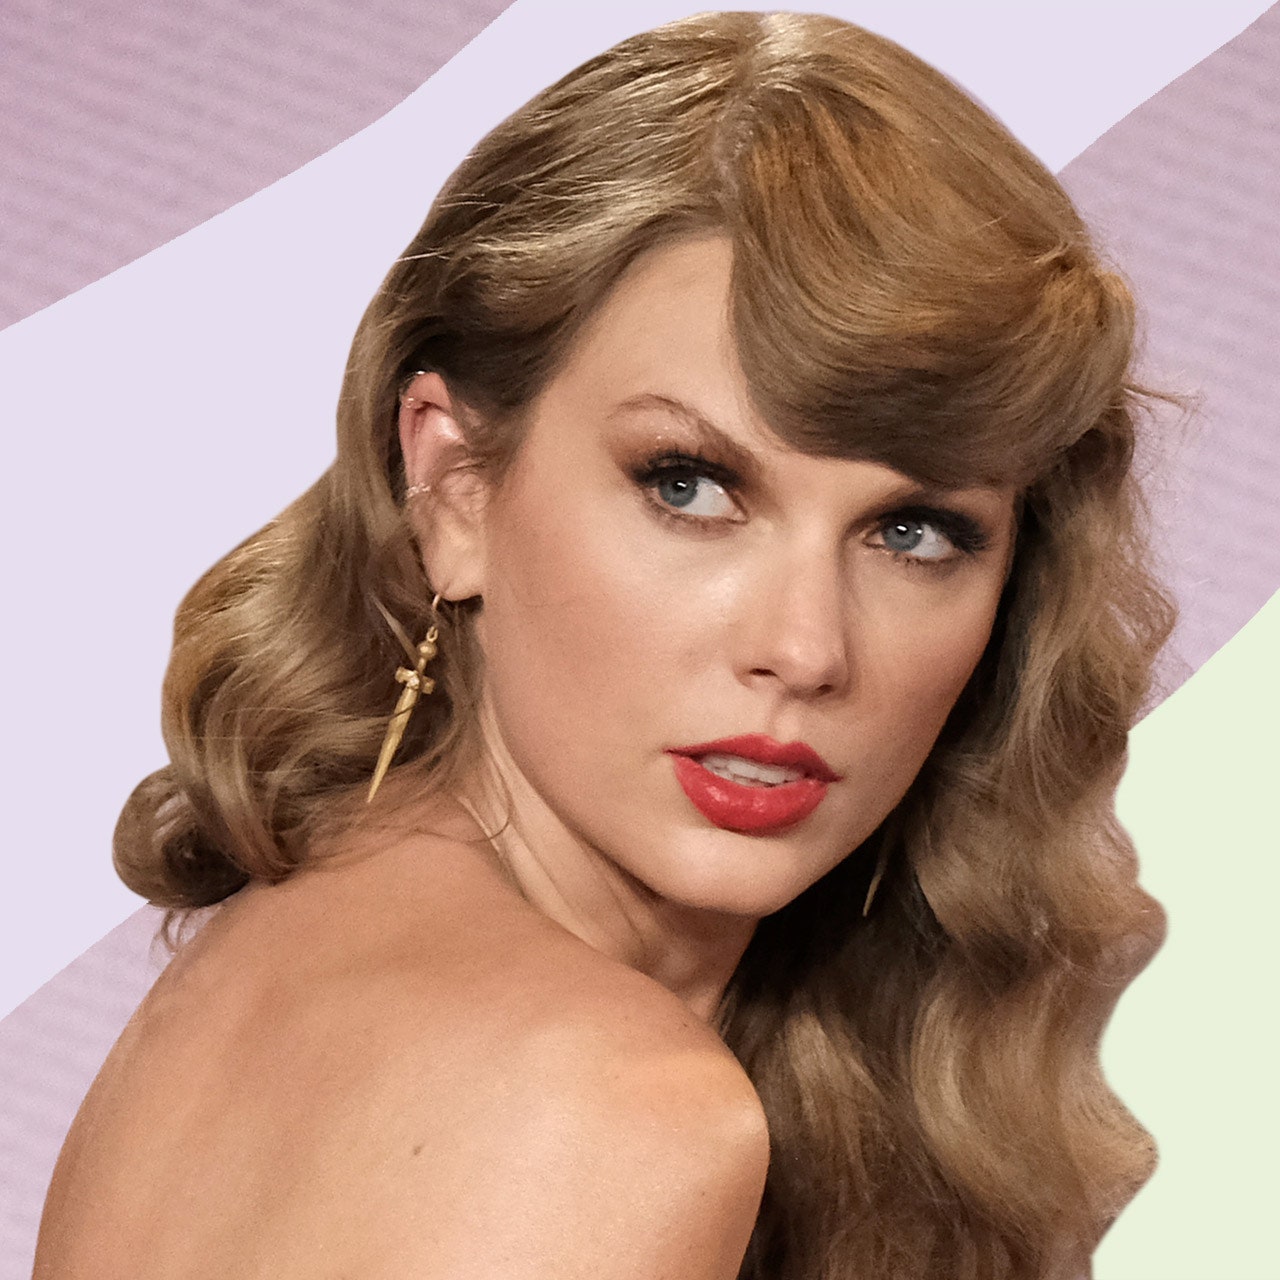 Is Taylor Swift Entering a New Style Era?